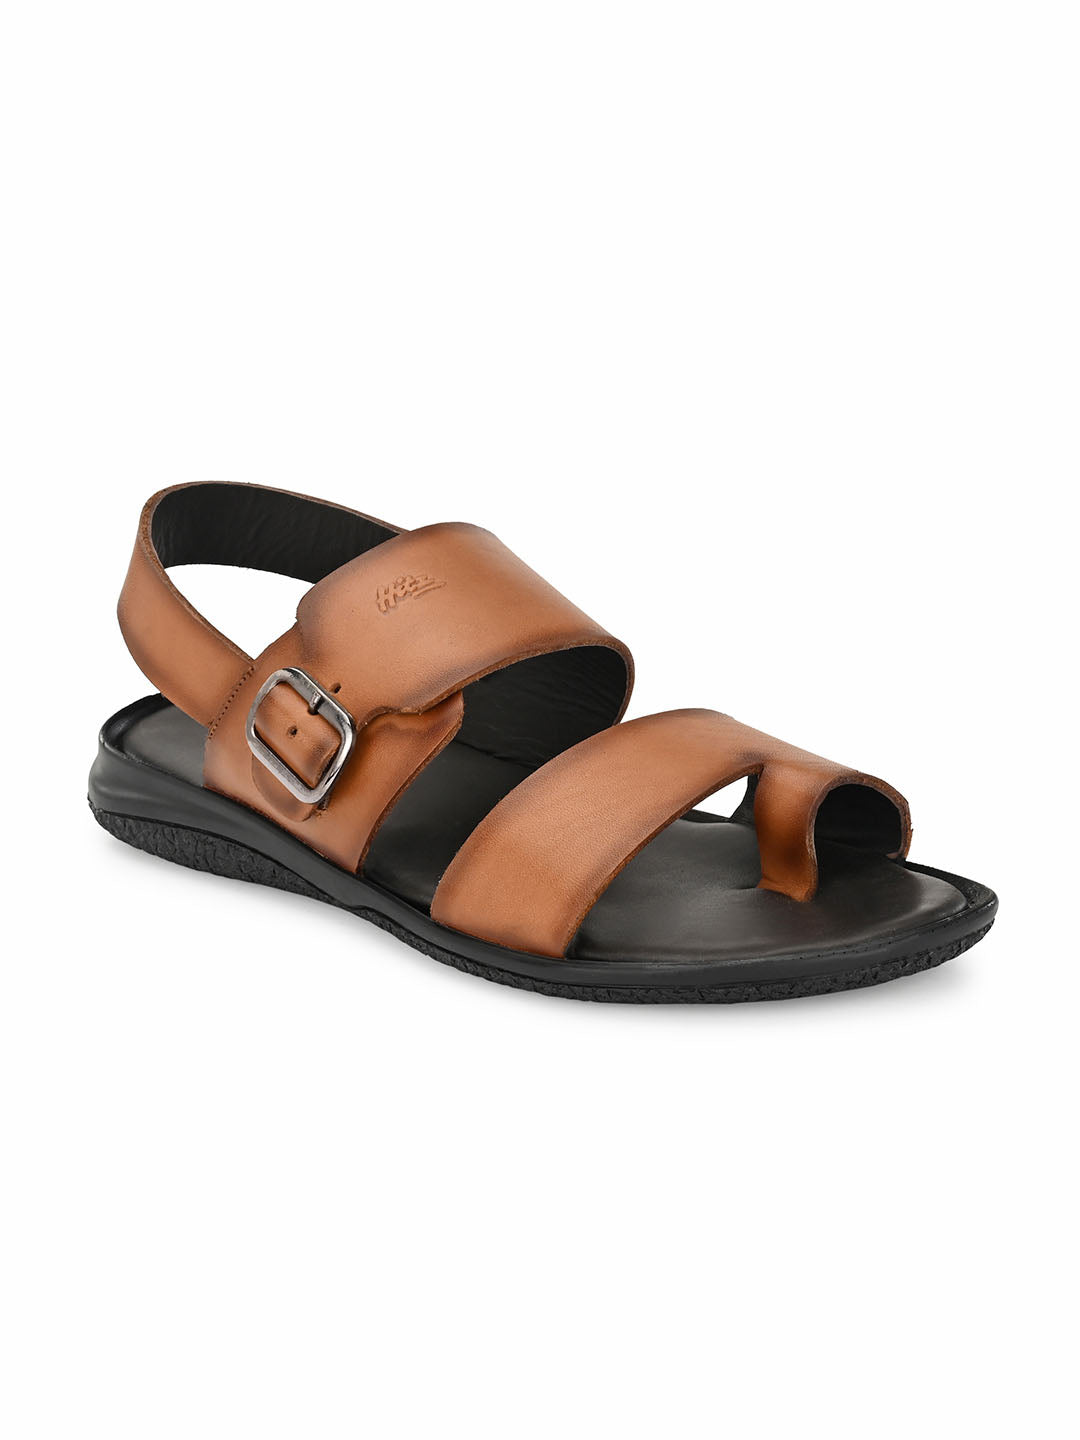 Men Real Leather Sandals Shoes Toe Ring Buckle Summer Beach Flat Slipper  Comfort | eBay